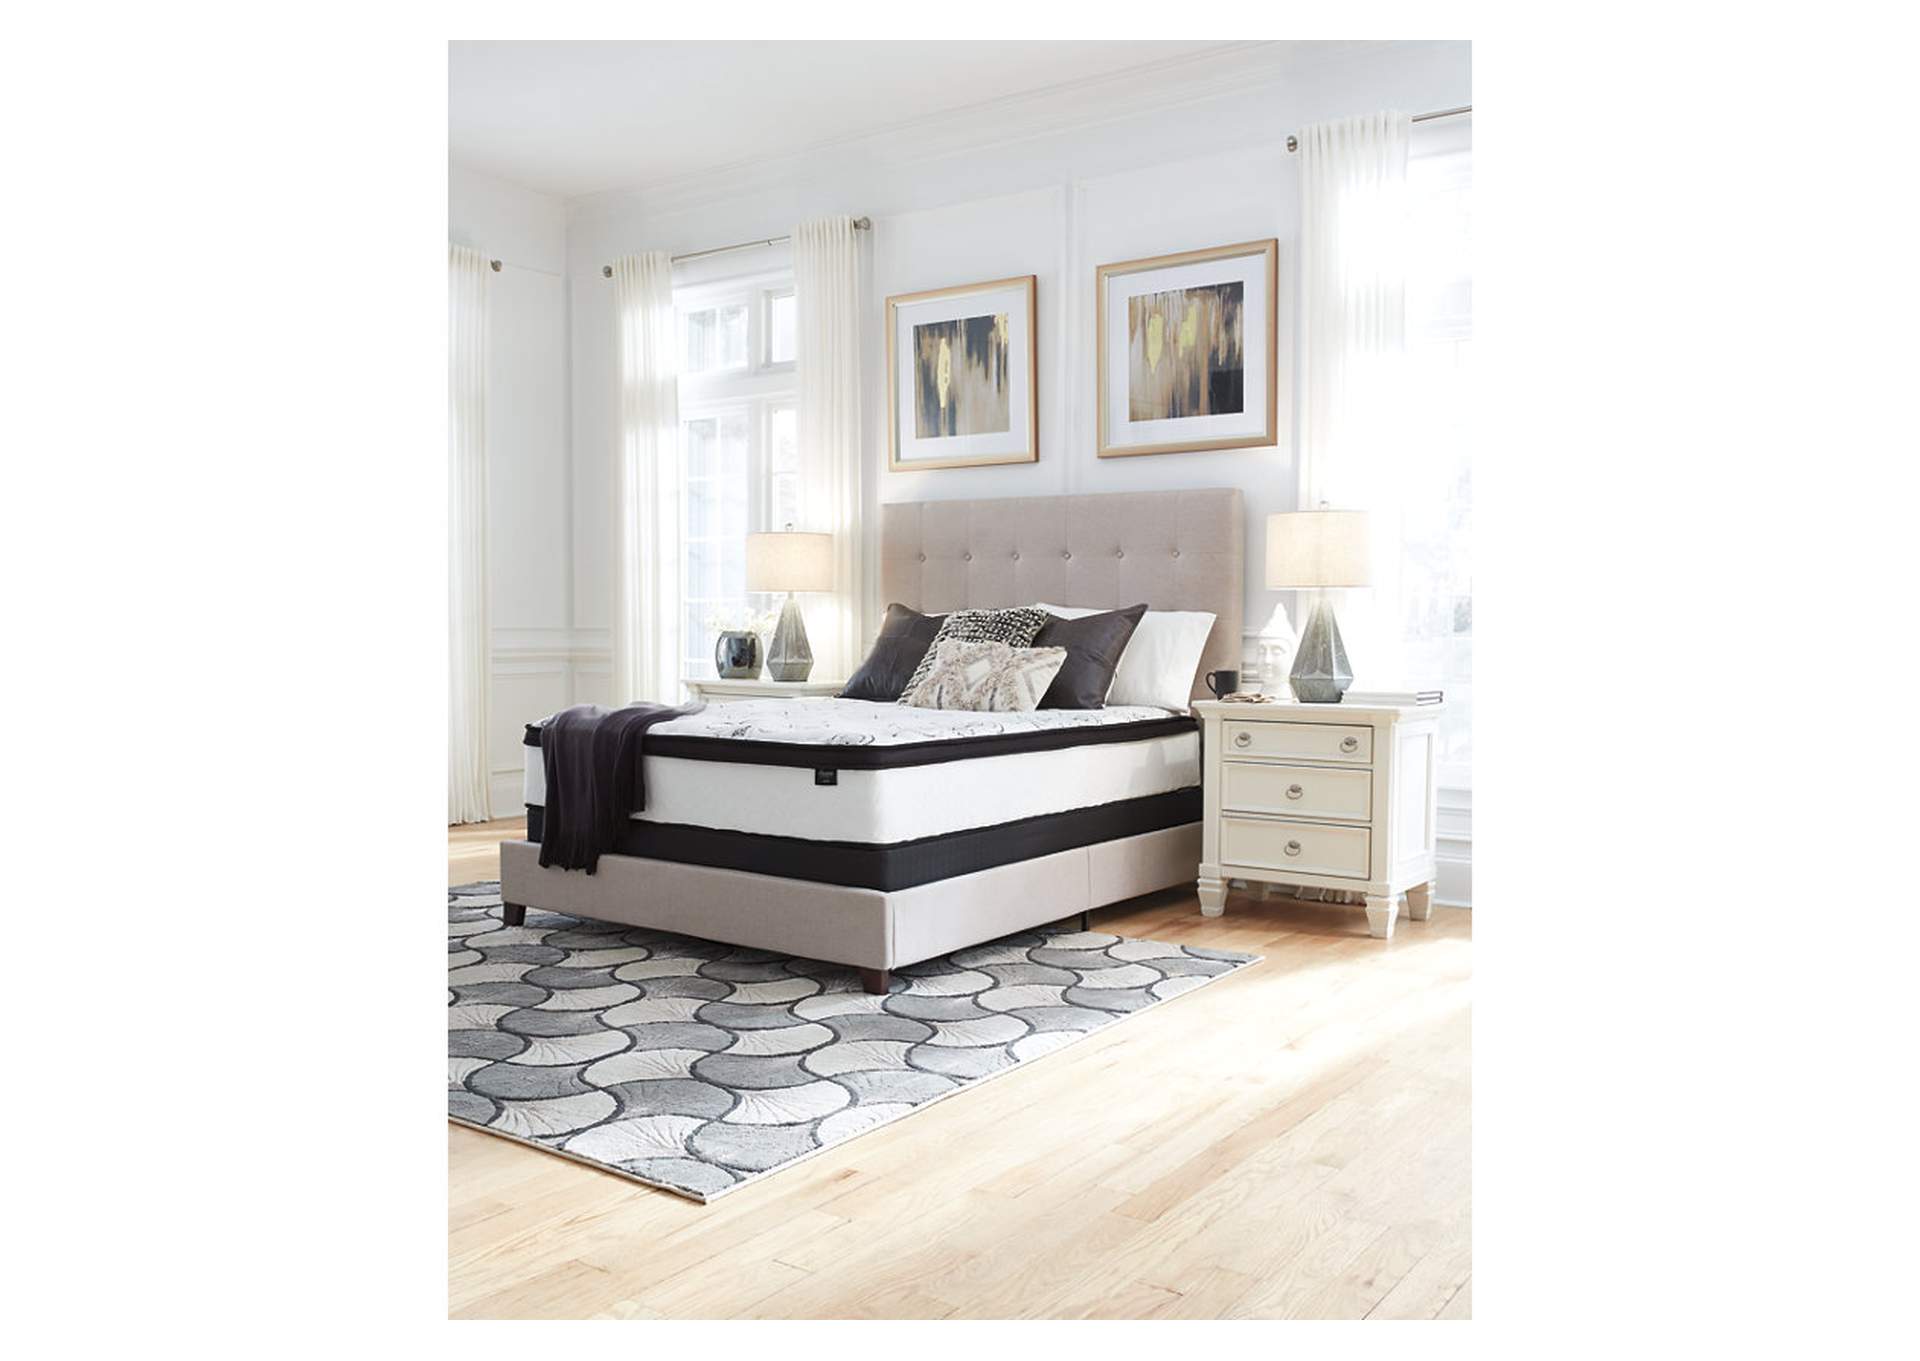 Chime 12 Inch Hybrid Queen Mattress in a Box,Direct To Consumer Express